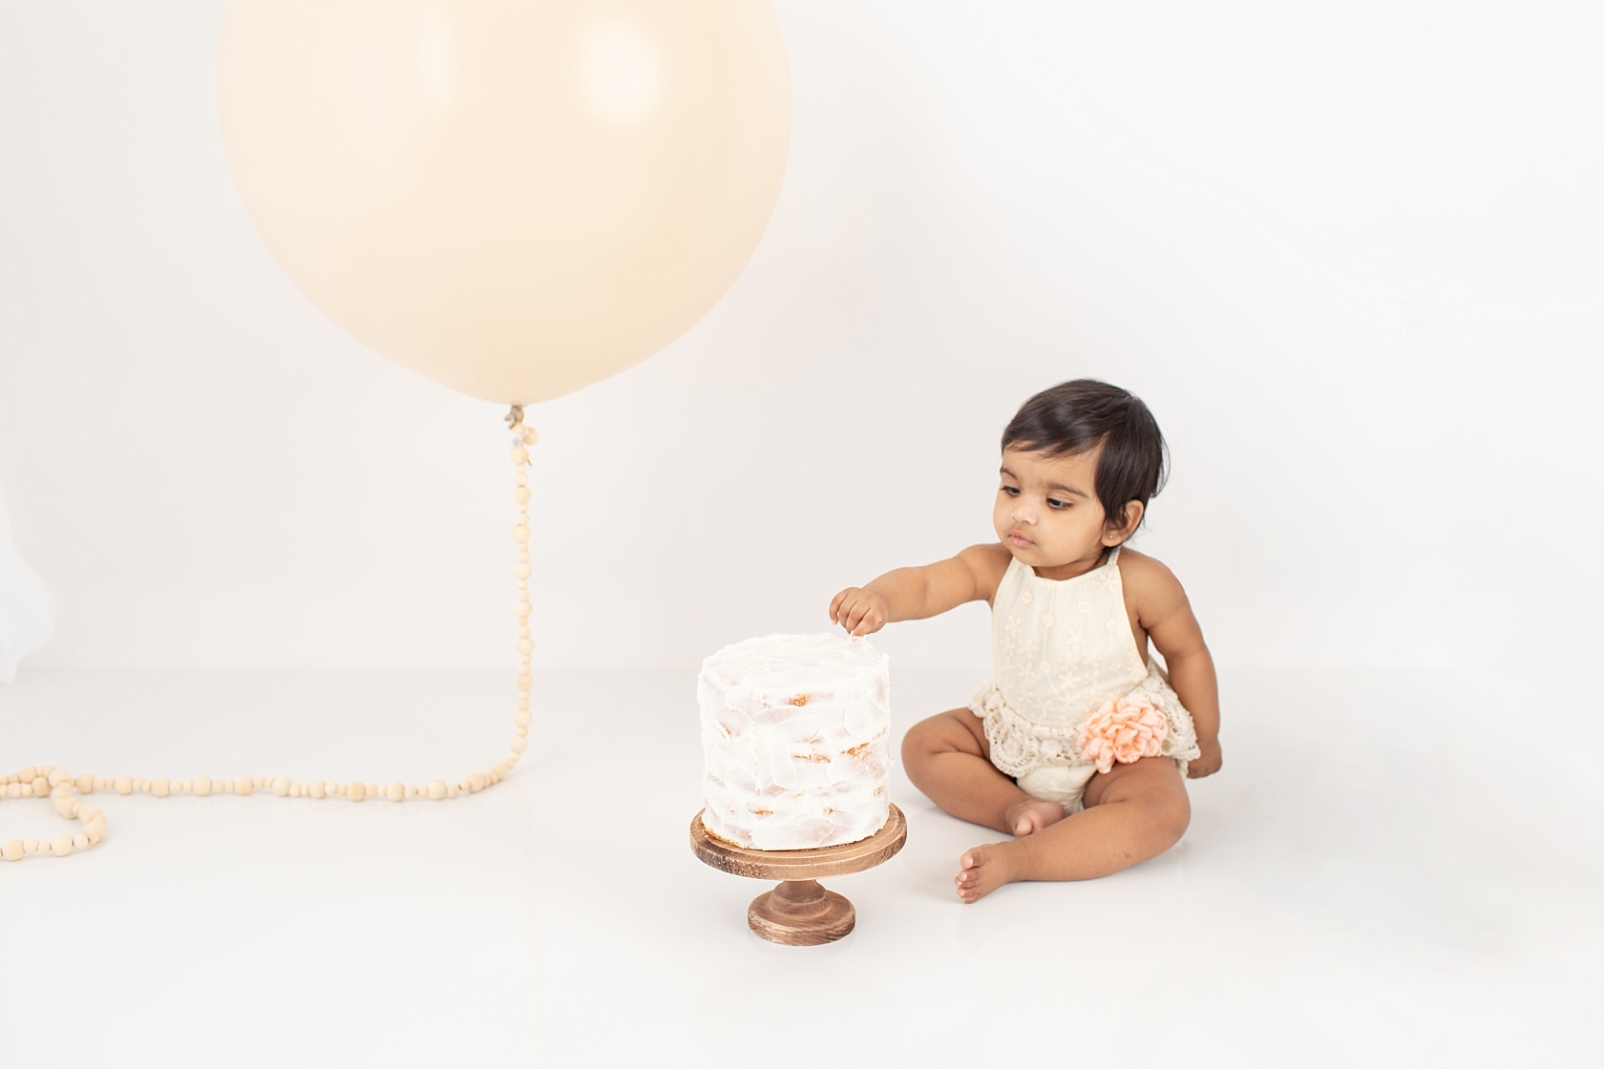 How to Choose a Smash Cake 6" cake with textured white icing and baby with decorative outfit and balloon eating cake
